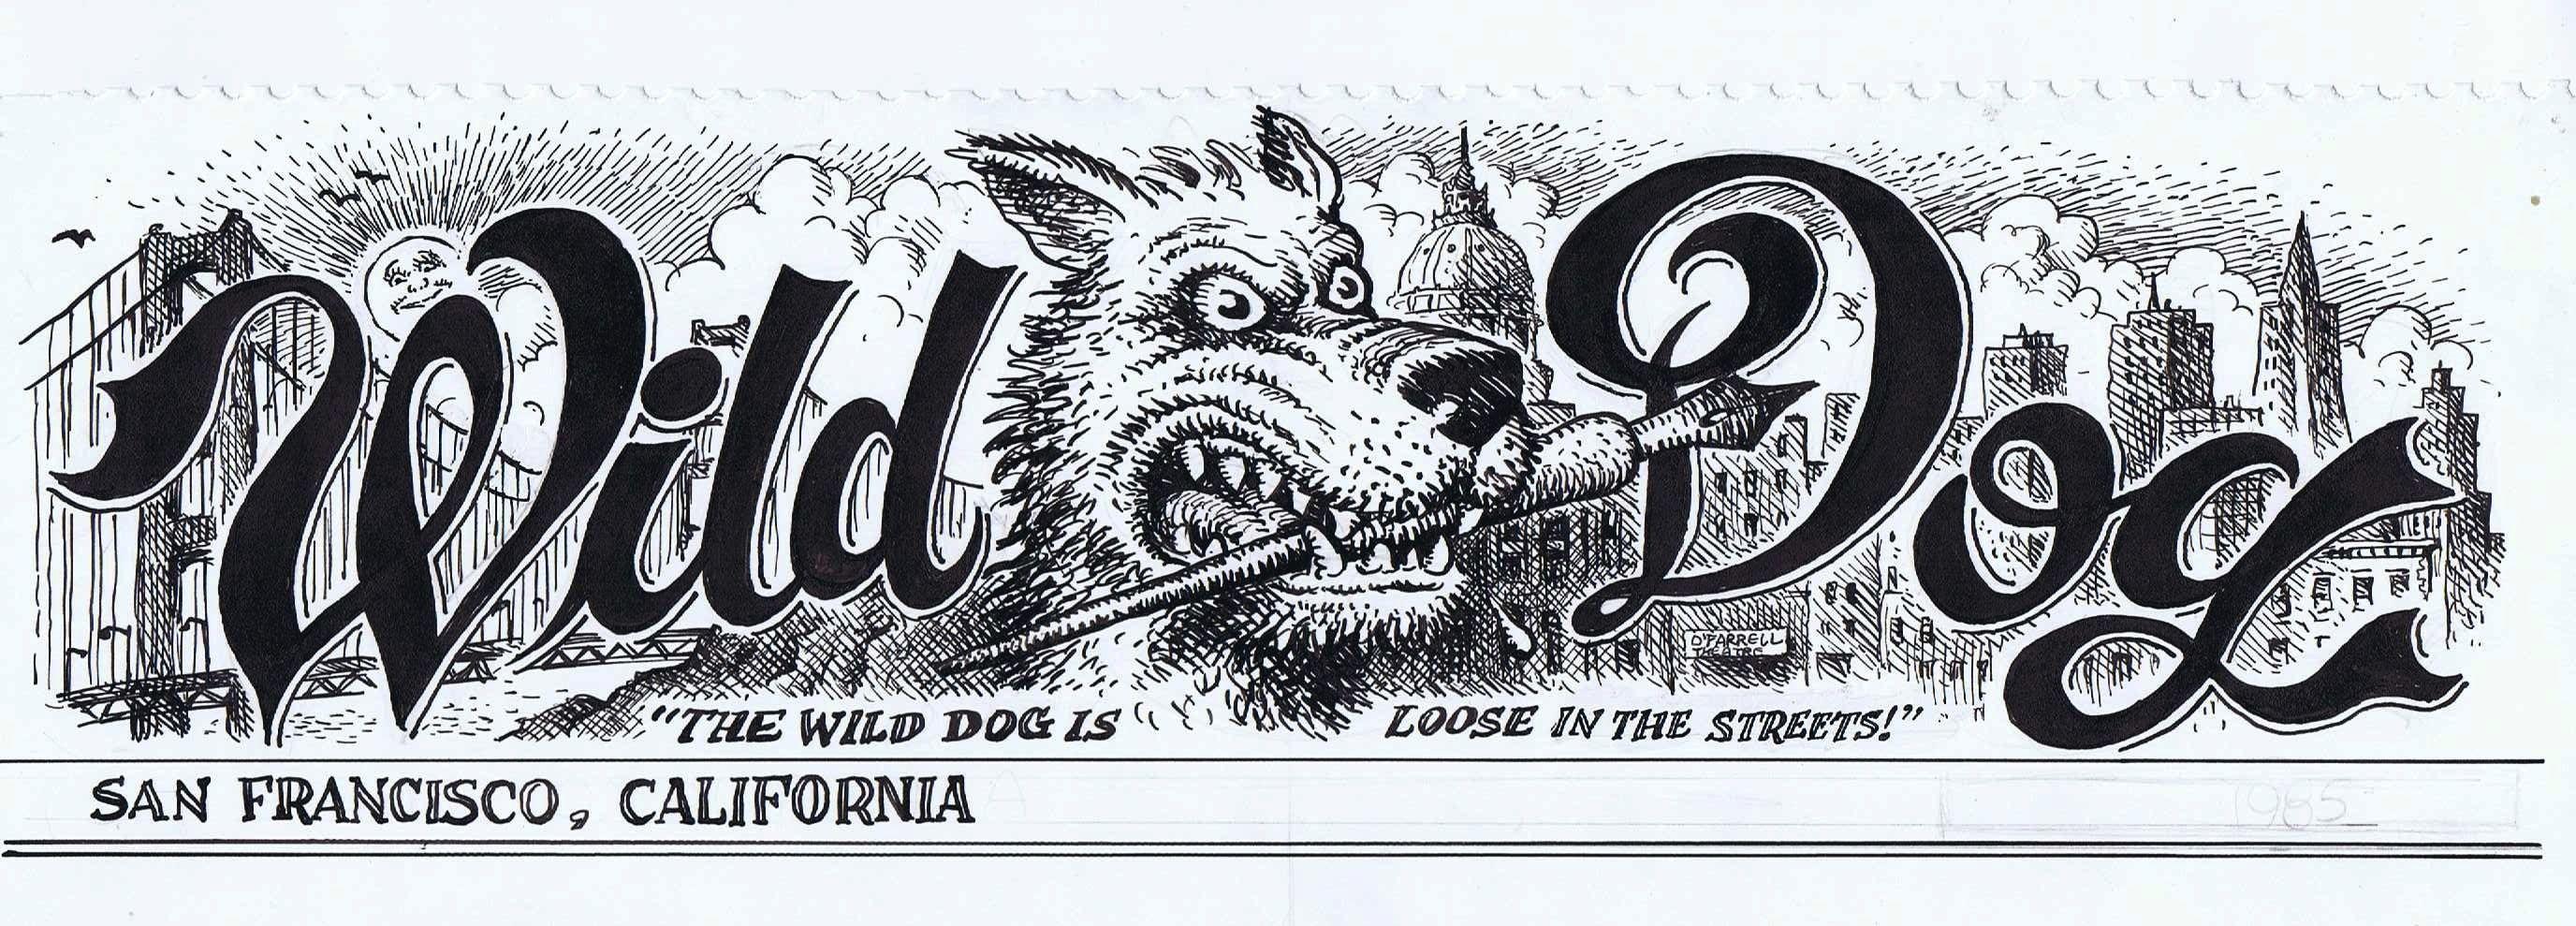 Dog with the End Logo - R Robert Crumb Wild Dog logo 1980s, in Rob Pistella's Sold or Traded ...